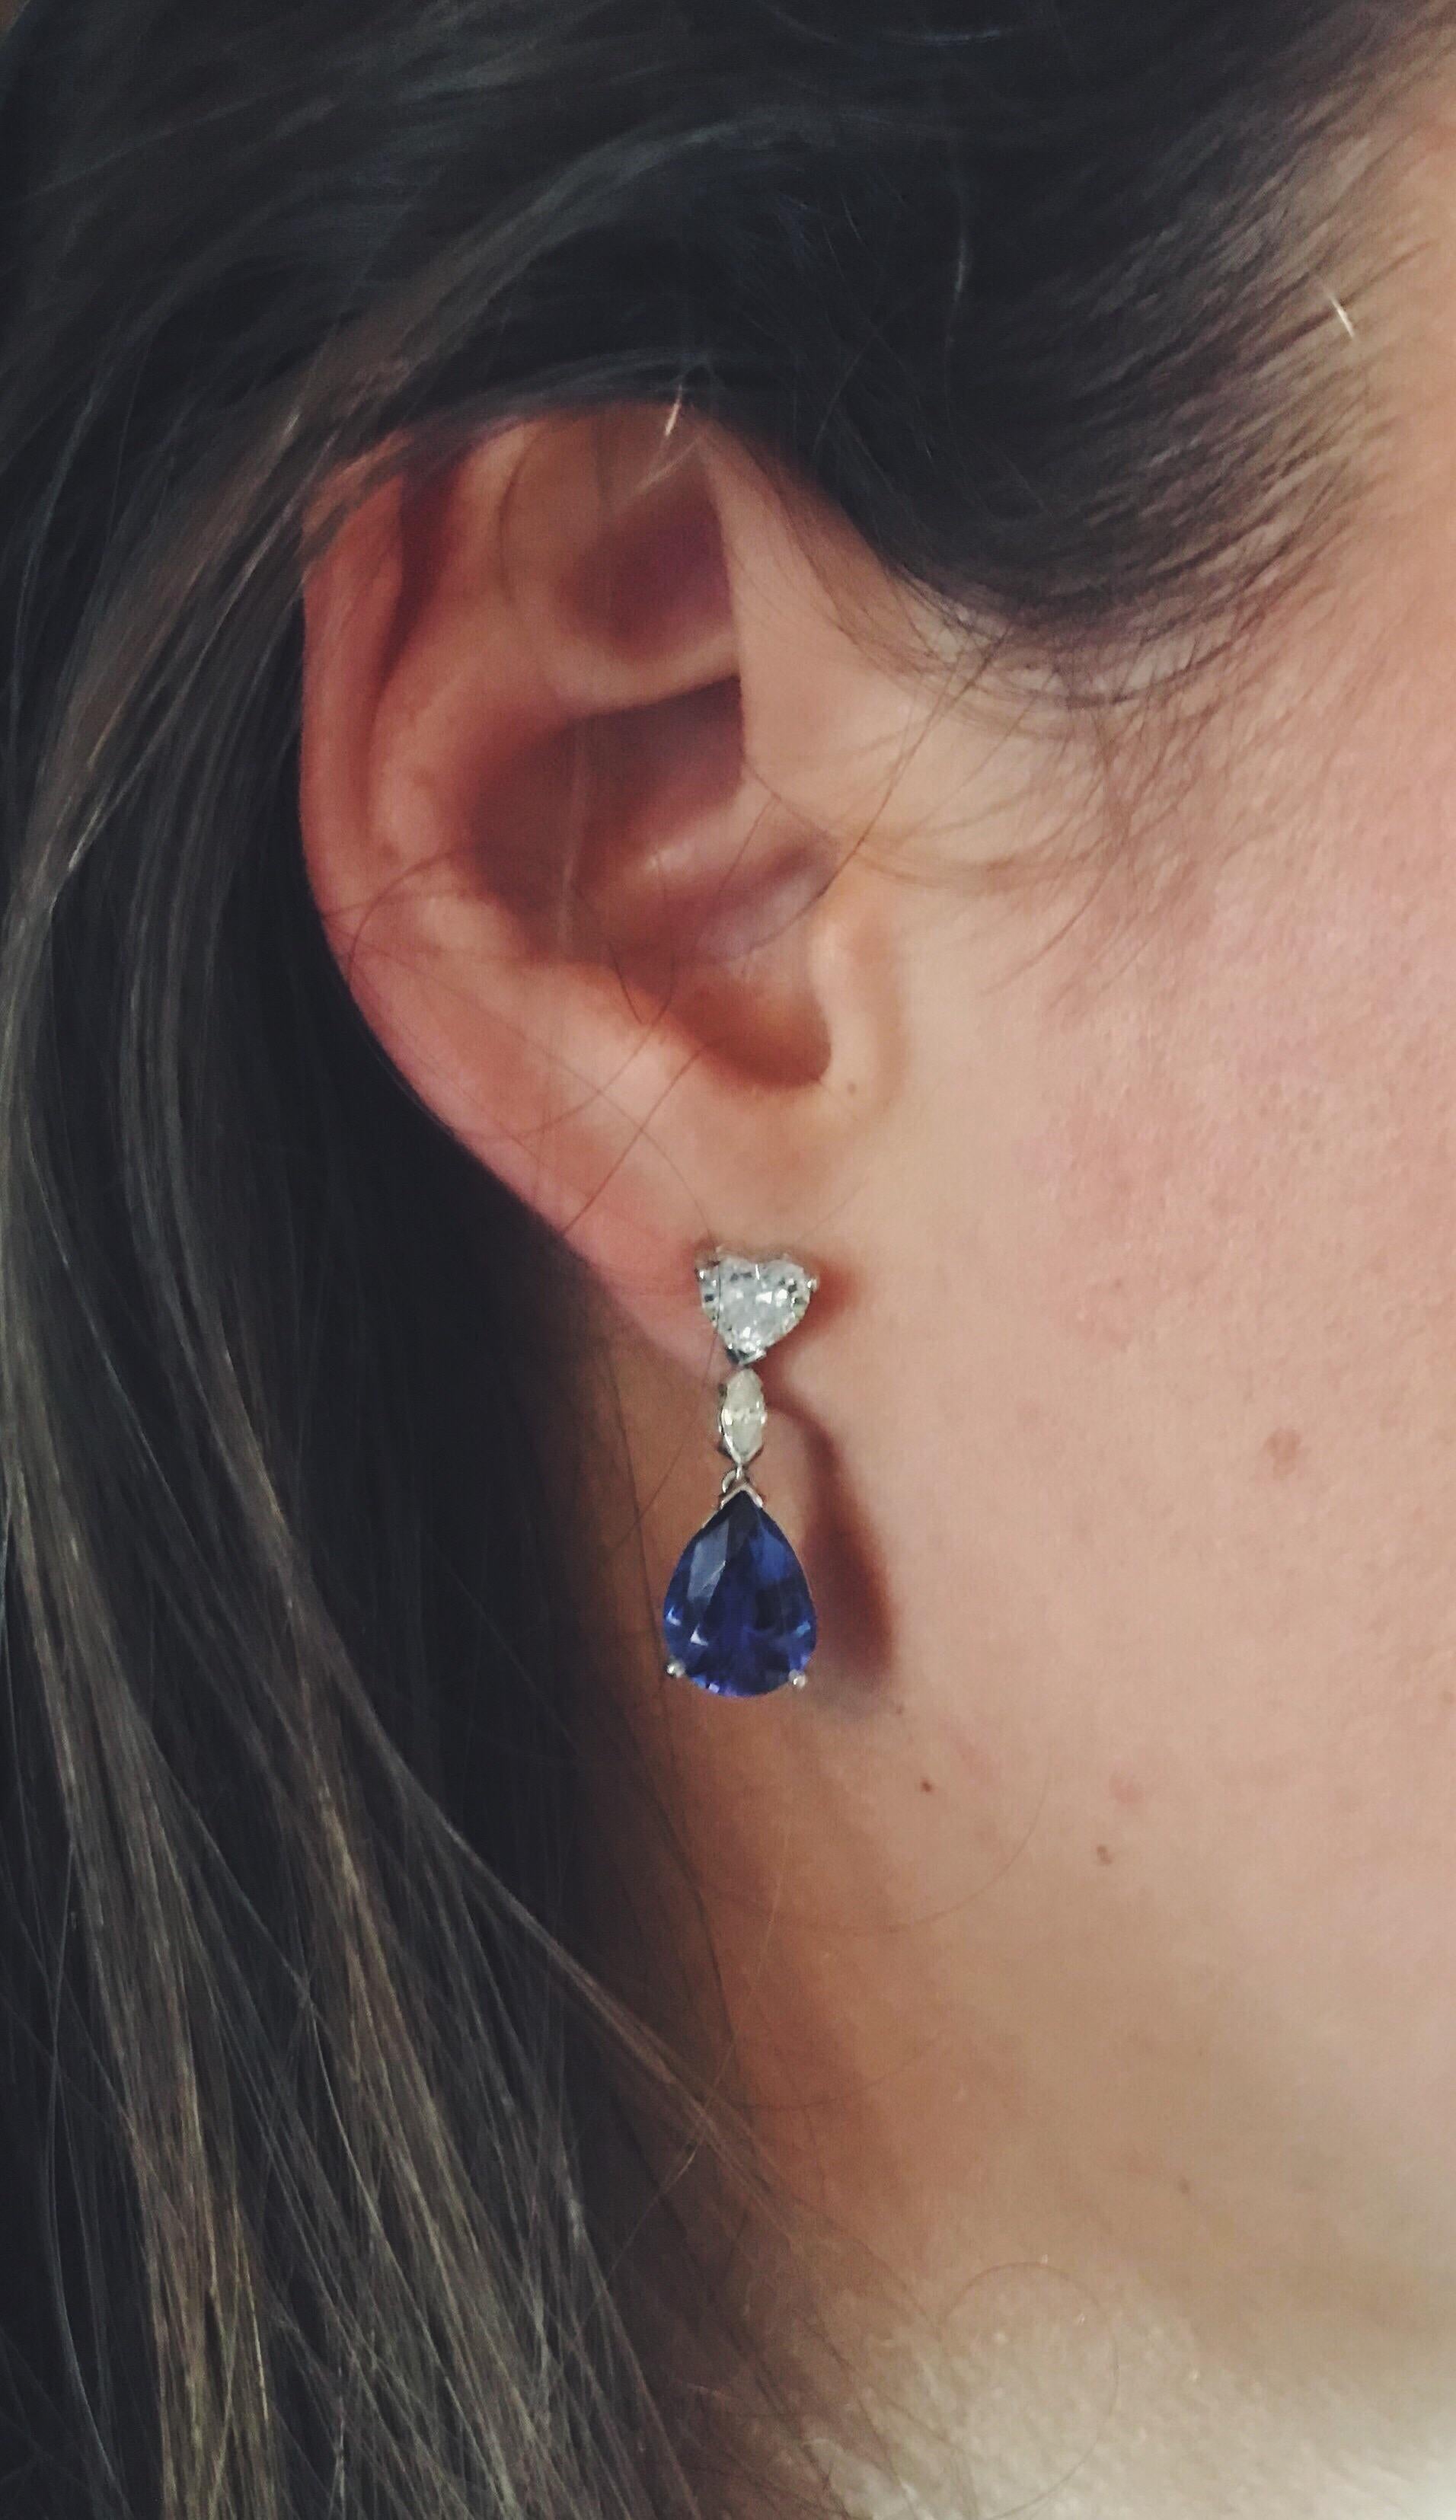 Royal Blue Tanzanite 4,77ct in total
White Diamonds 1,46ct in total SI1 E-F
18kt White Gold 4,10g

Two White Heart shaped diamonds are at the centre of these impressive cocktail earrings set in 18kt White Gold. A further two brilliant cut diamonds